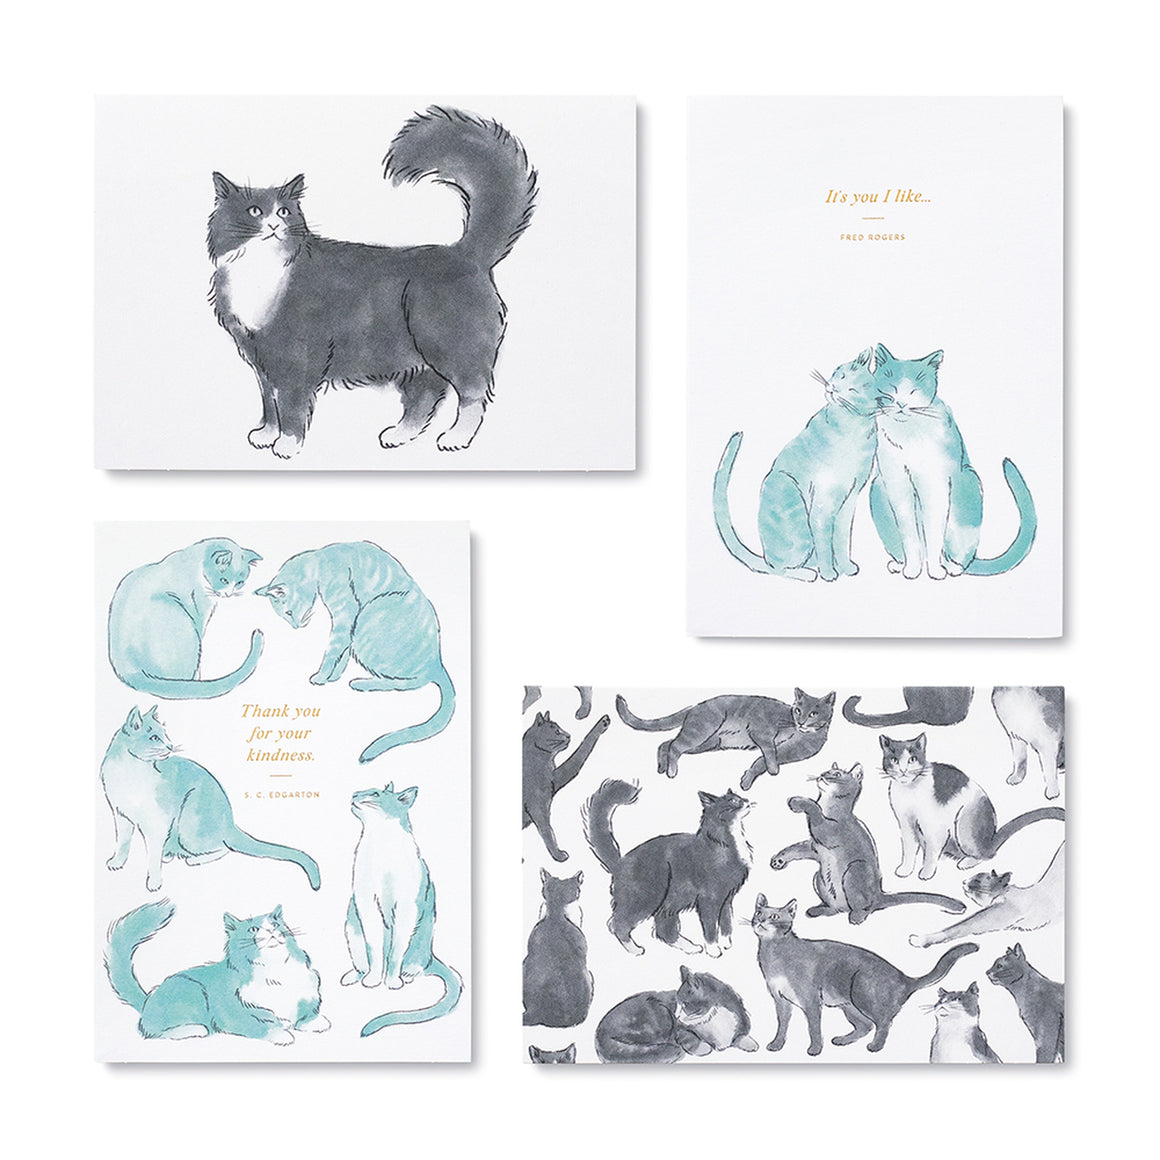 CAT THEMED NOTE CARDS APPRECIATION & FRIENDSHIP